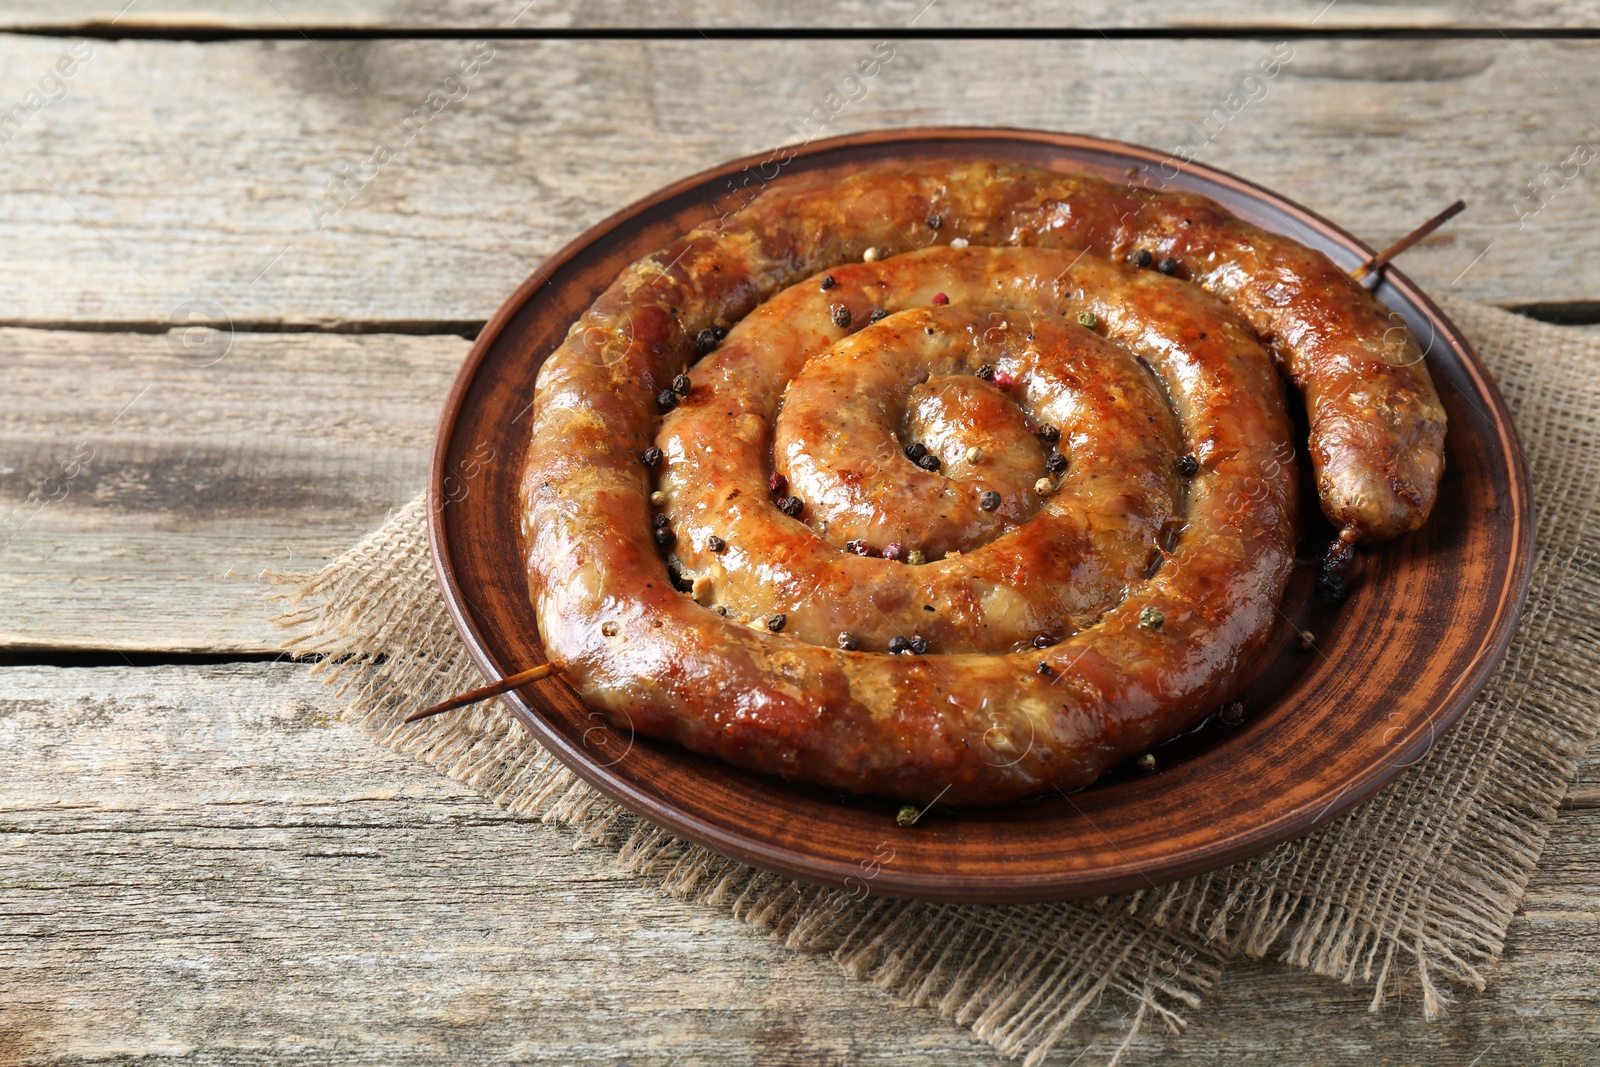 Photo of Plate with tasty homemade sausages on wooden table